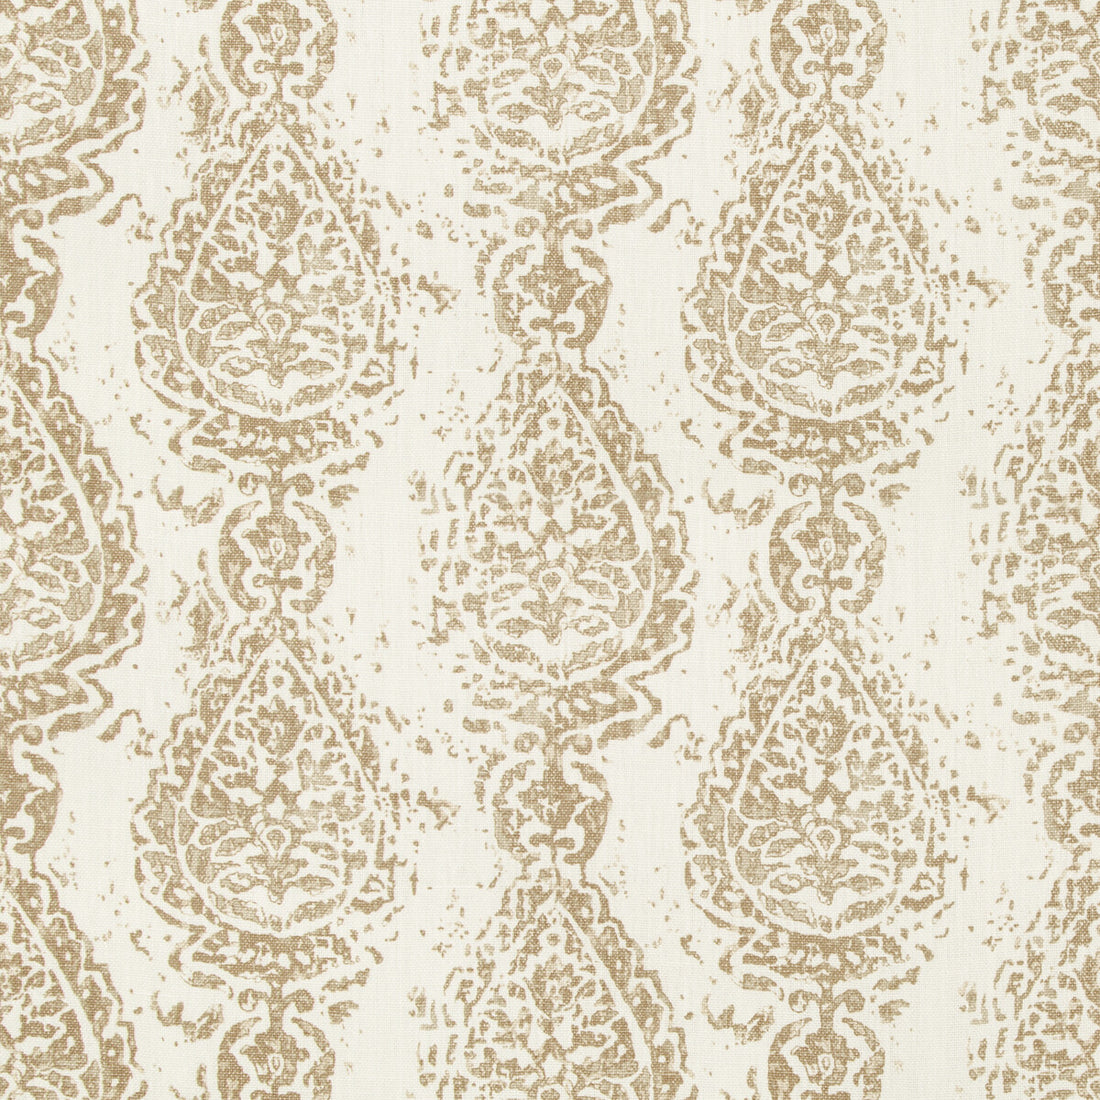 Abbess Paisley fabric in coconut color - pattern ABBESS.16.0 - by Kravet Design in the Barclay Butera Sagamore collection